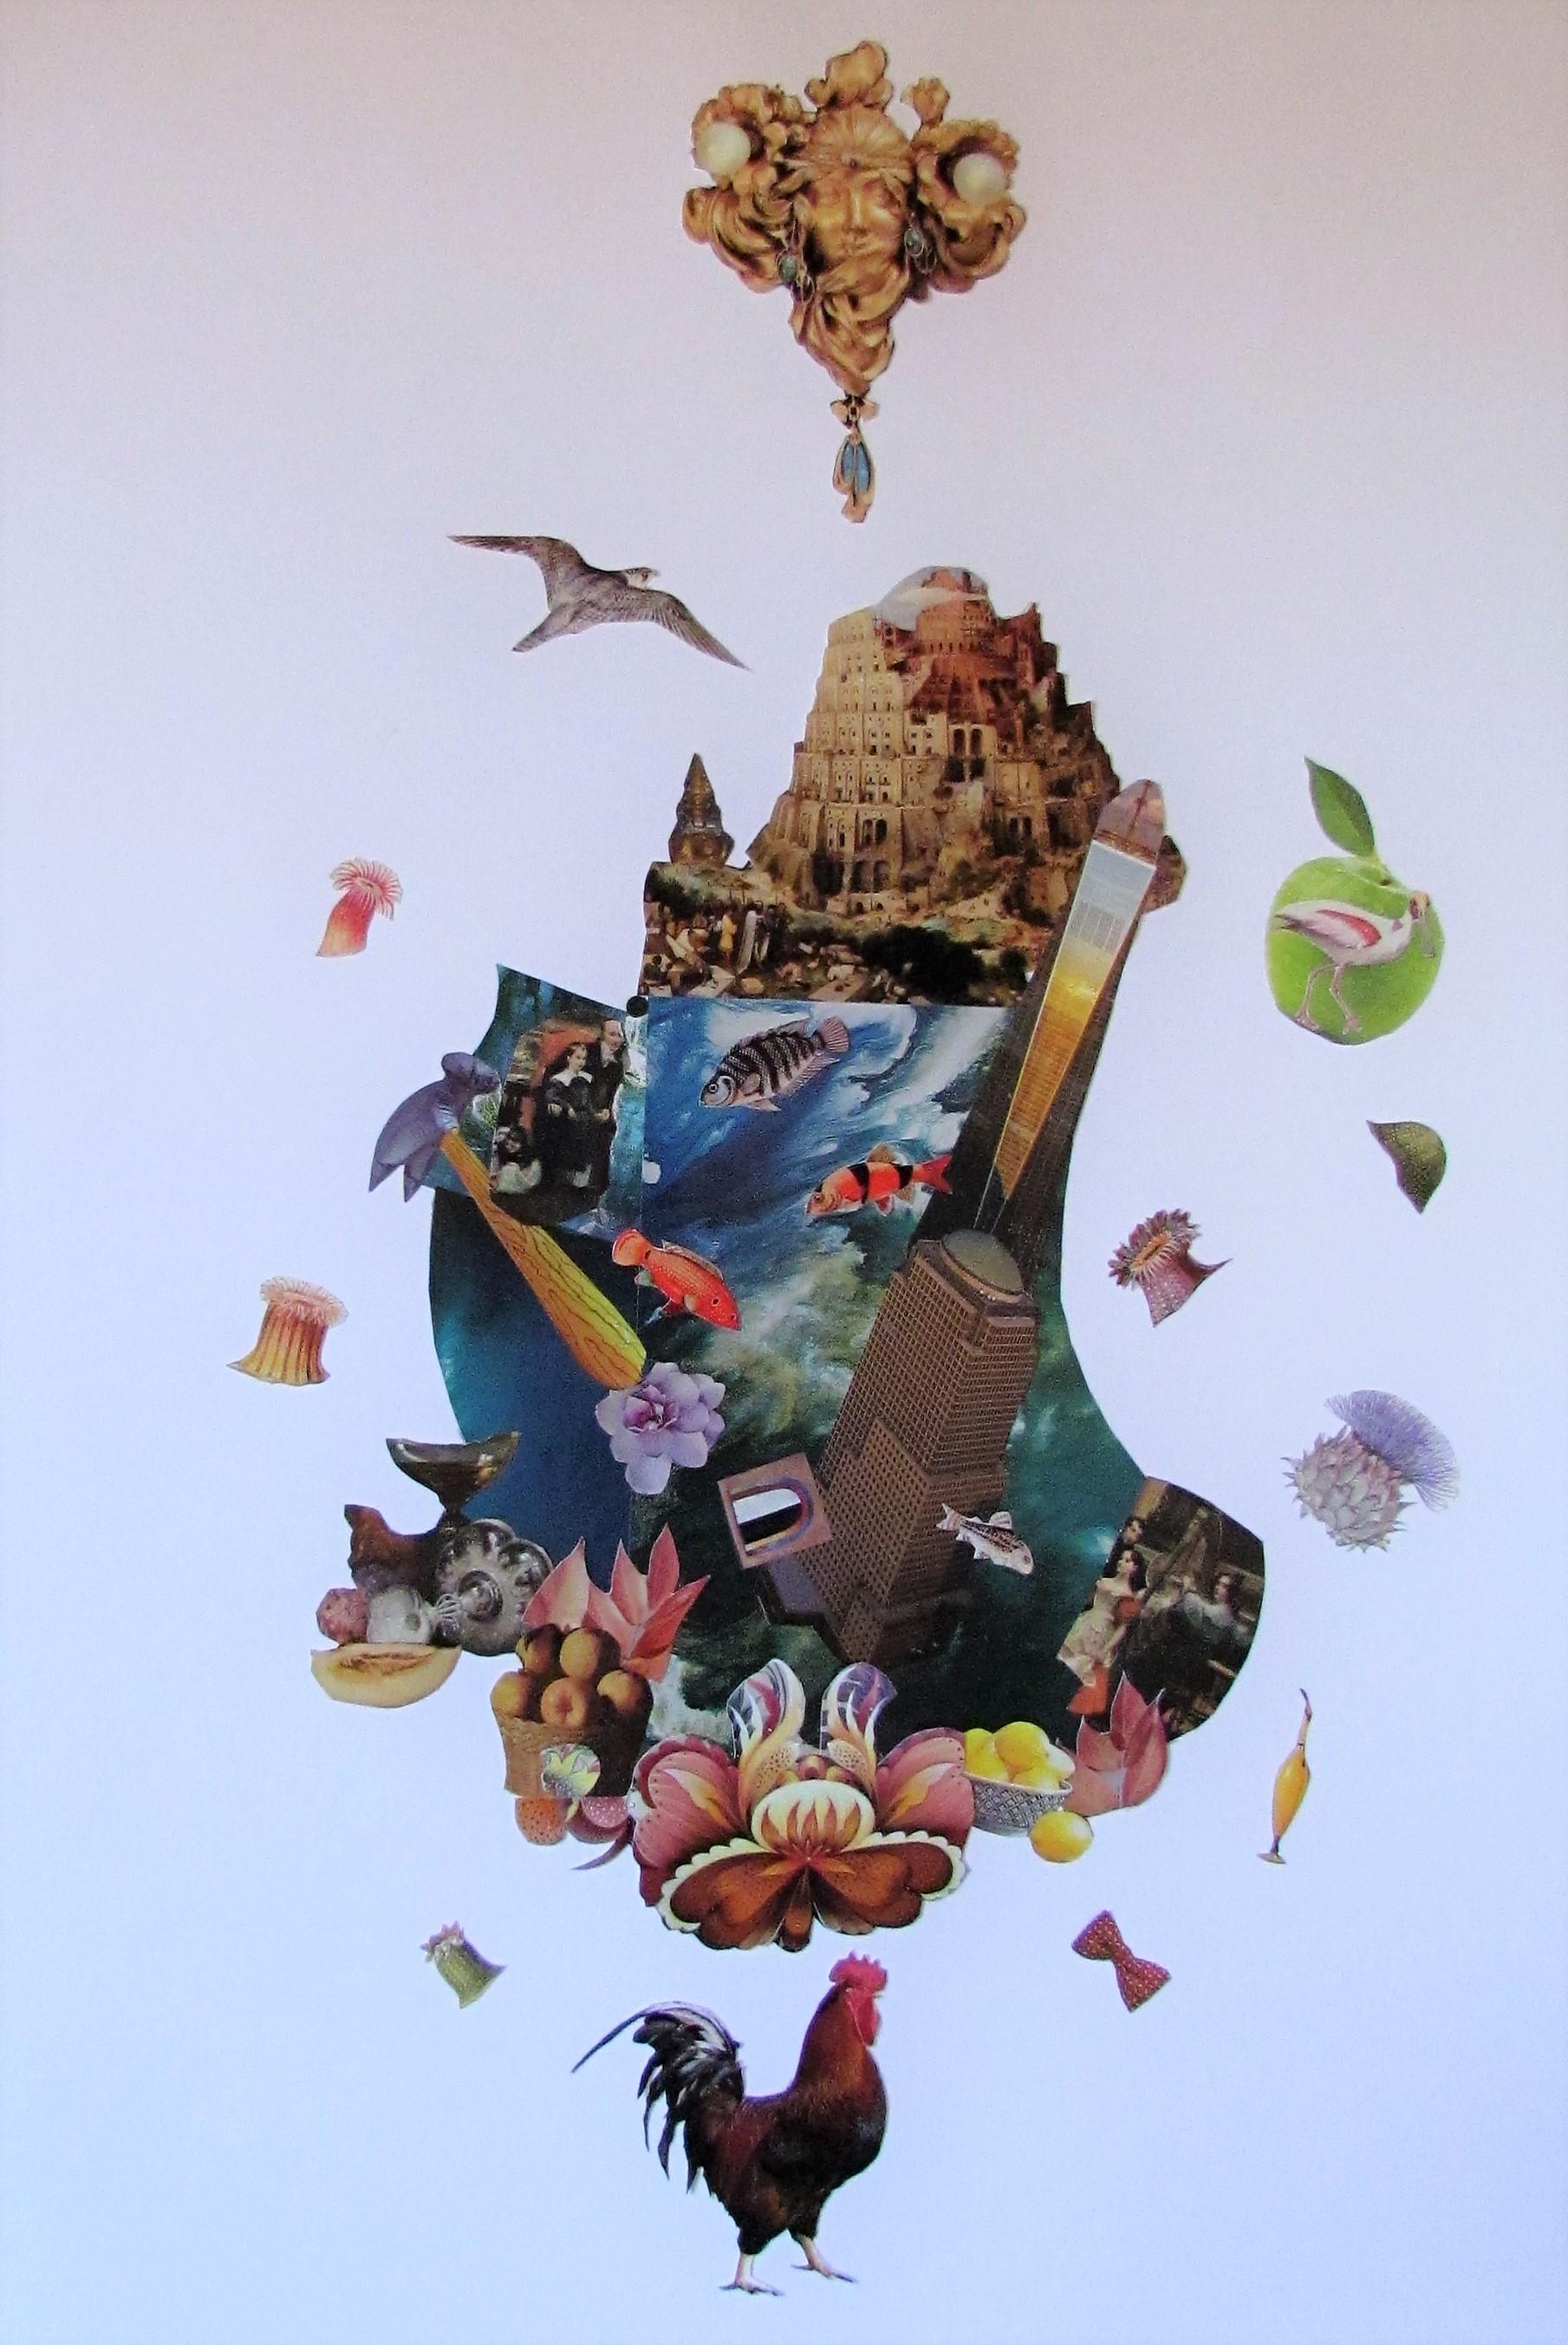 Imaginary Worlds 4 - collage, framed - Mixed Media Art by Alison Keenan